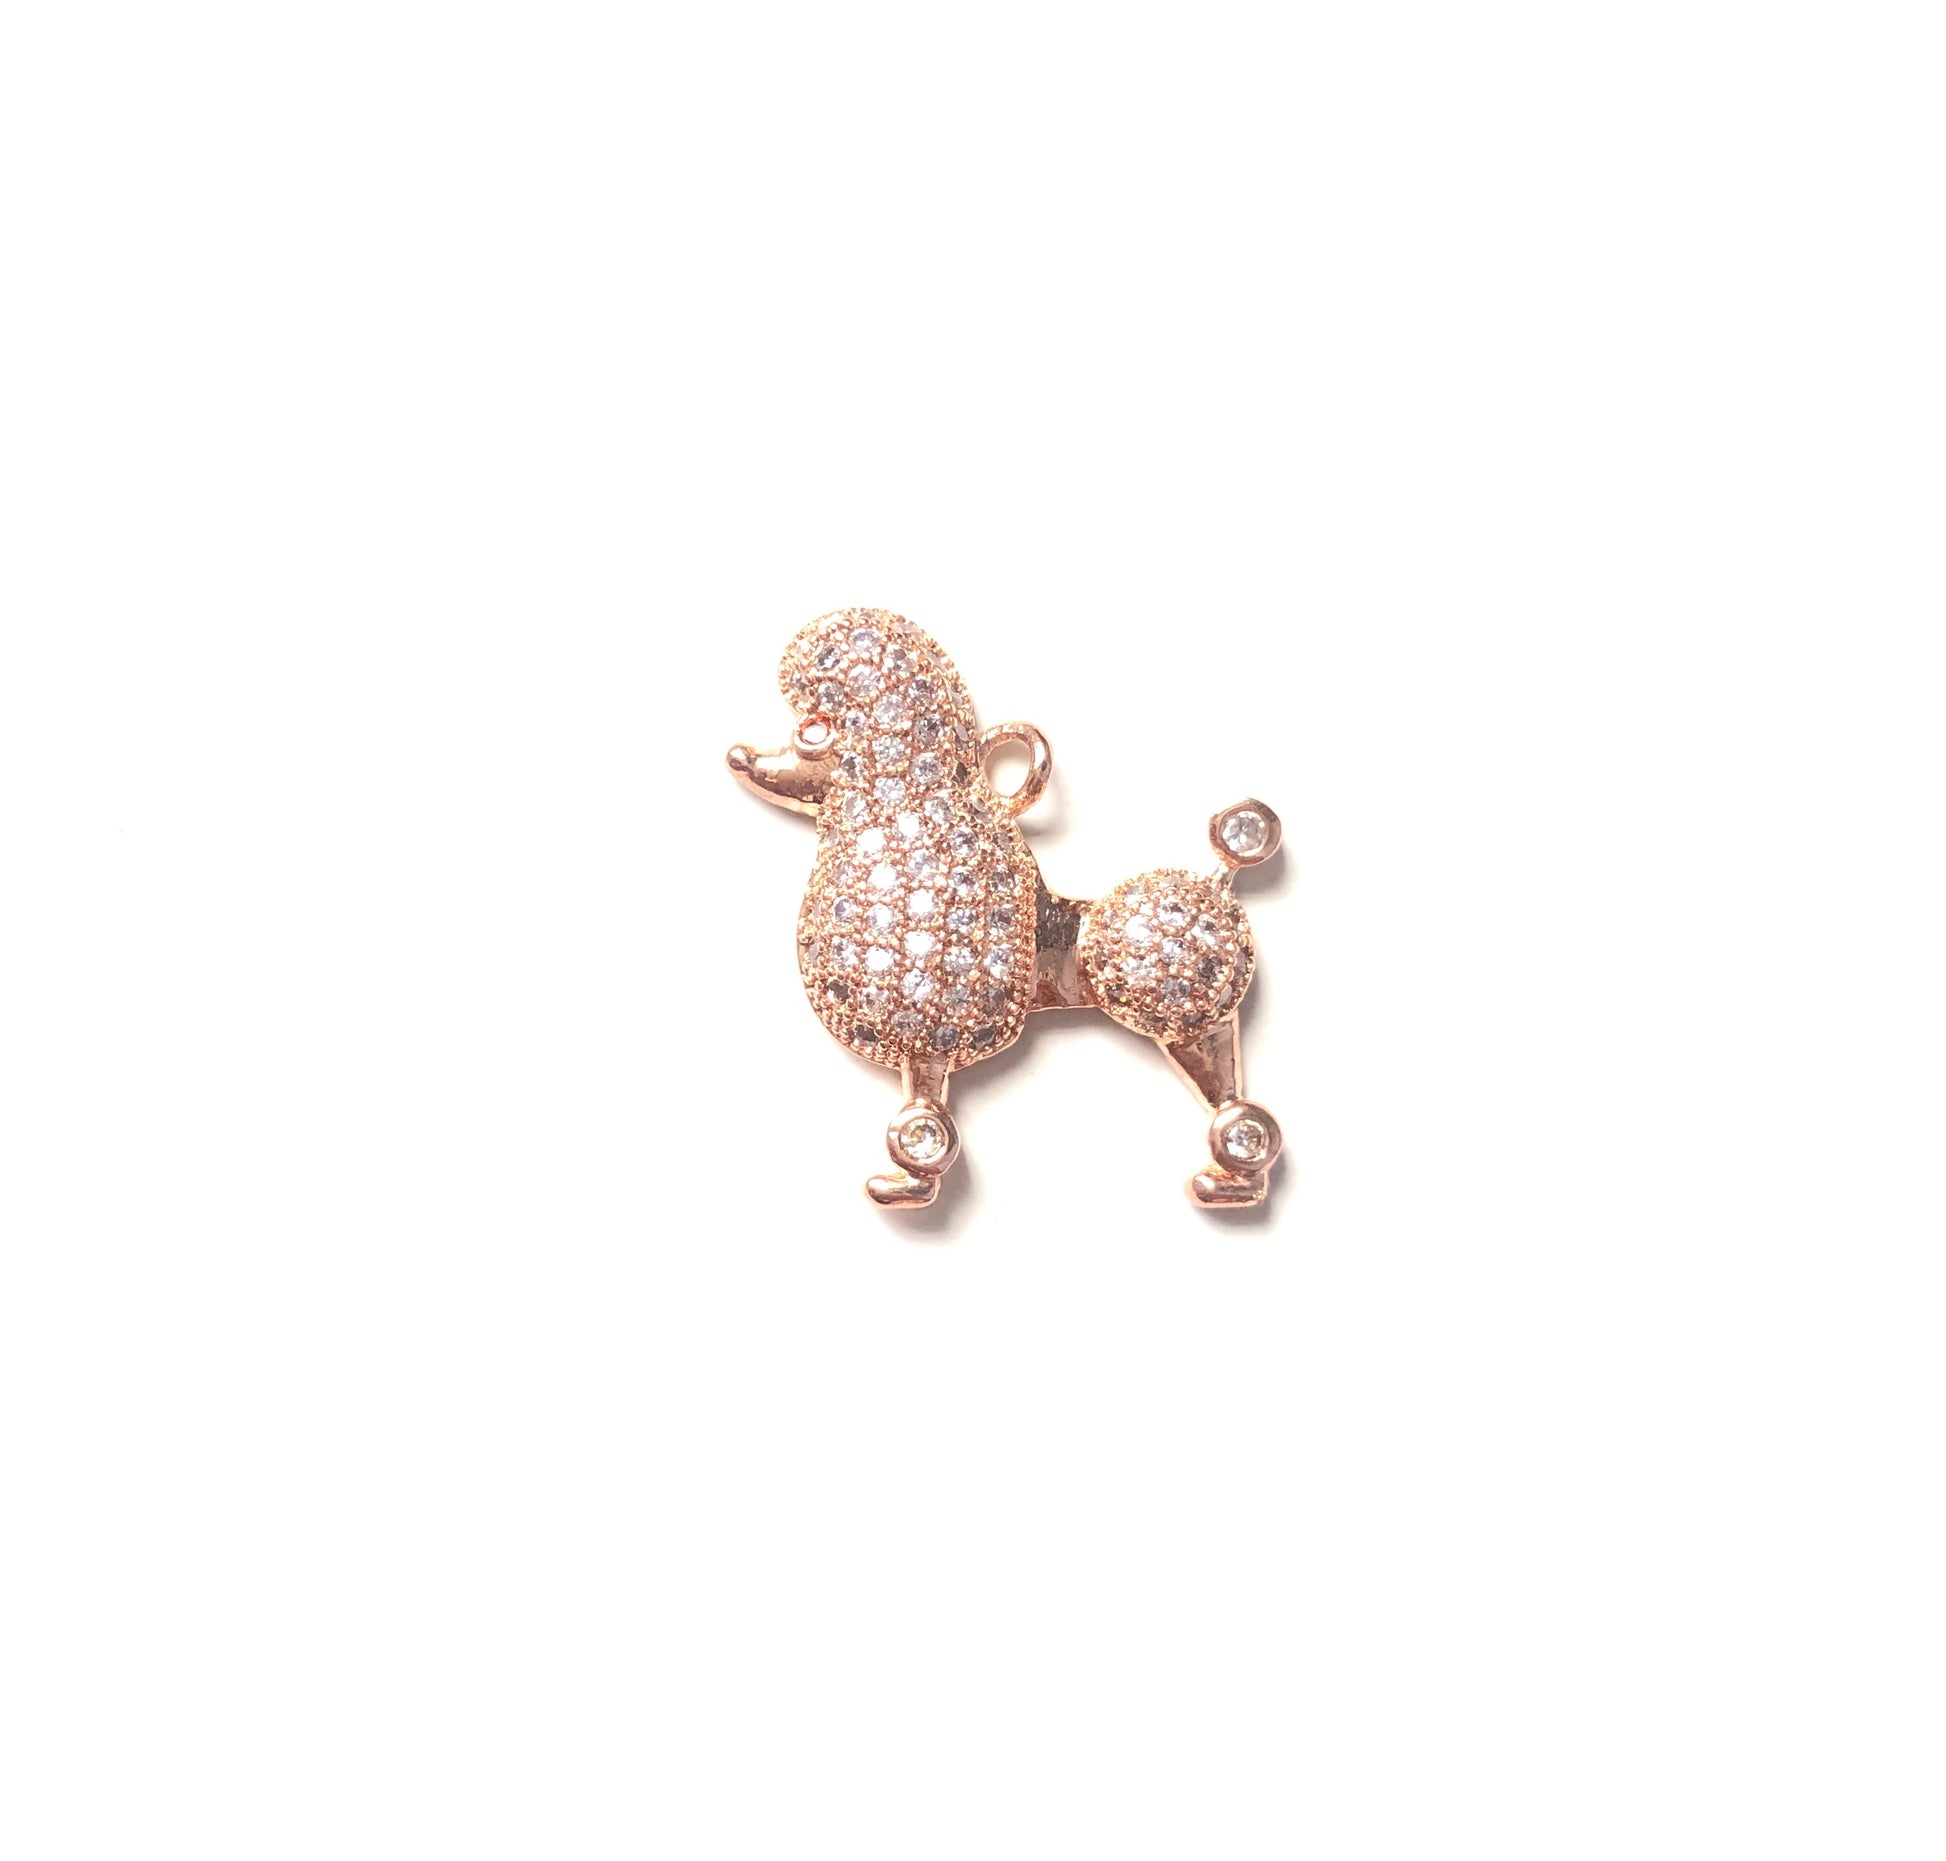 10pcs/lot 19*19mm CZ Paved Poodle Charms Rose Gold CZ Paved Charms Animals & Insects Charms Beads Beyond